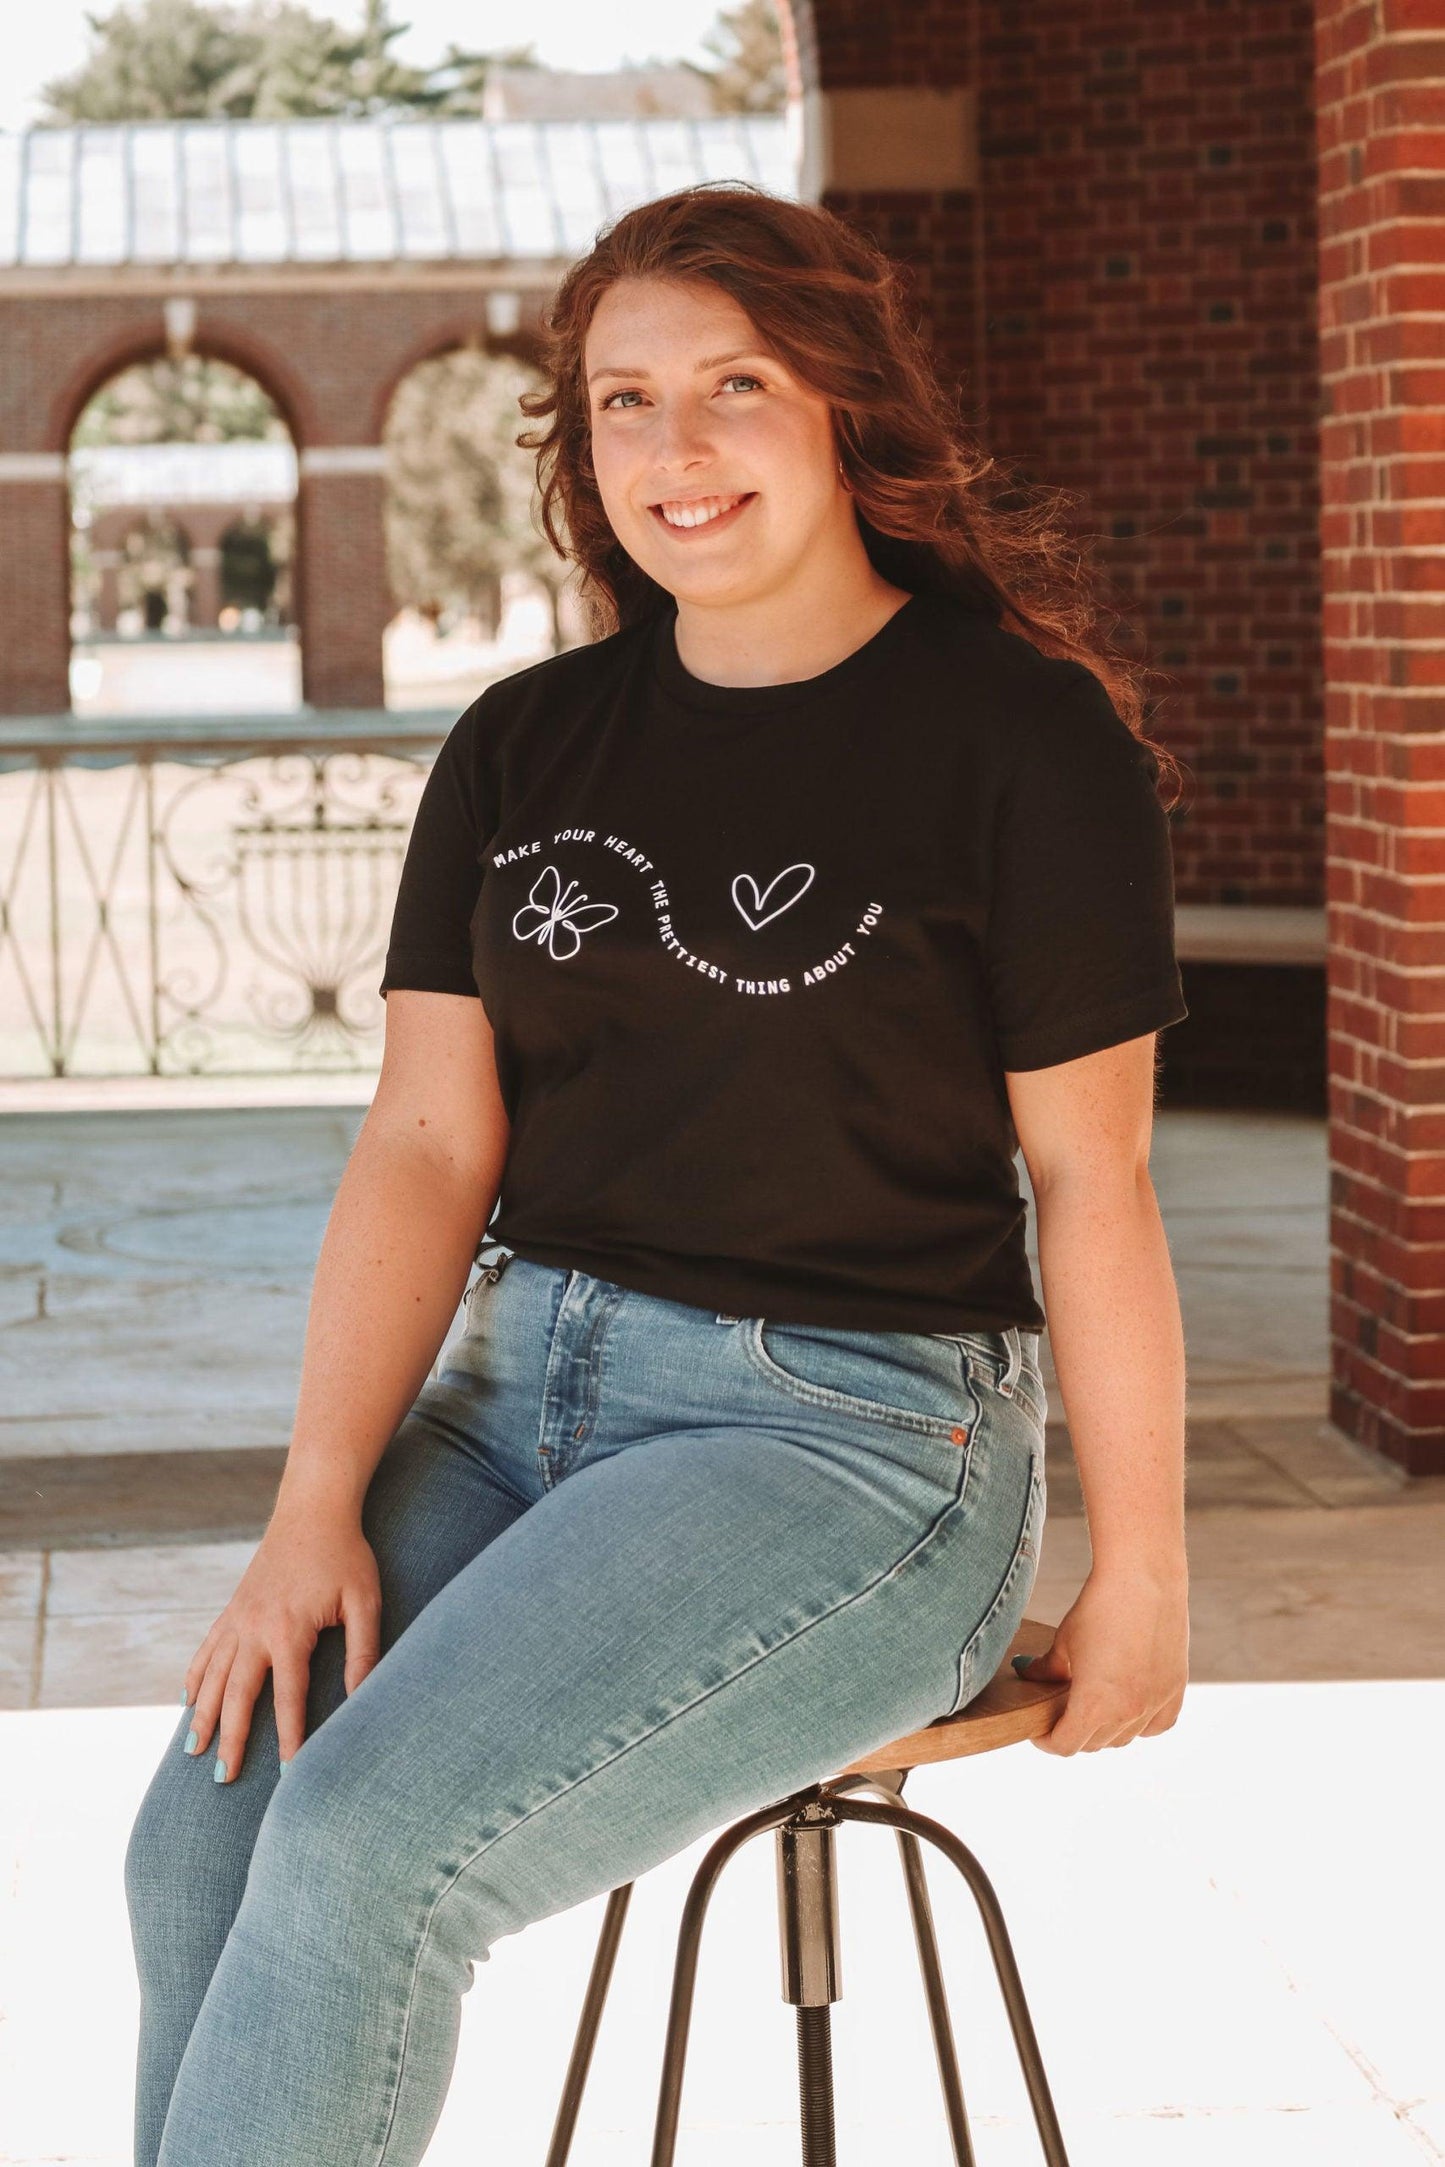 A photo of a girl in a black t-shirt and jeans. The shirt says "Make your heart the prettiest thing about you" with a butterfly and a heart. The girls is sitting on a stool at a slight angle